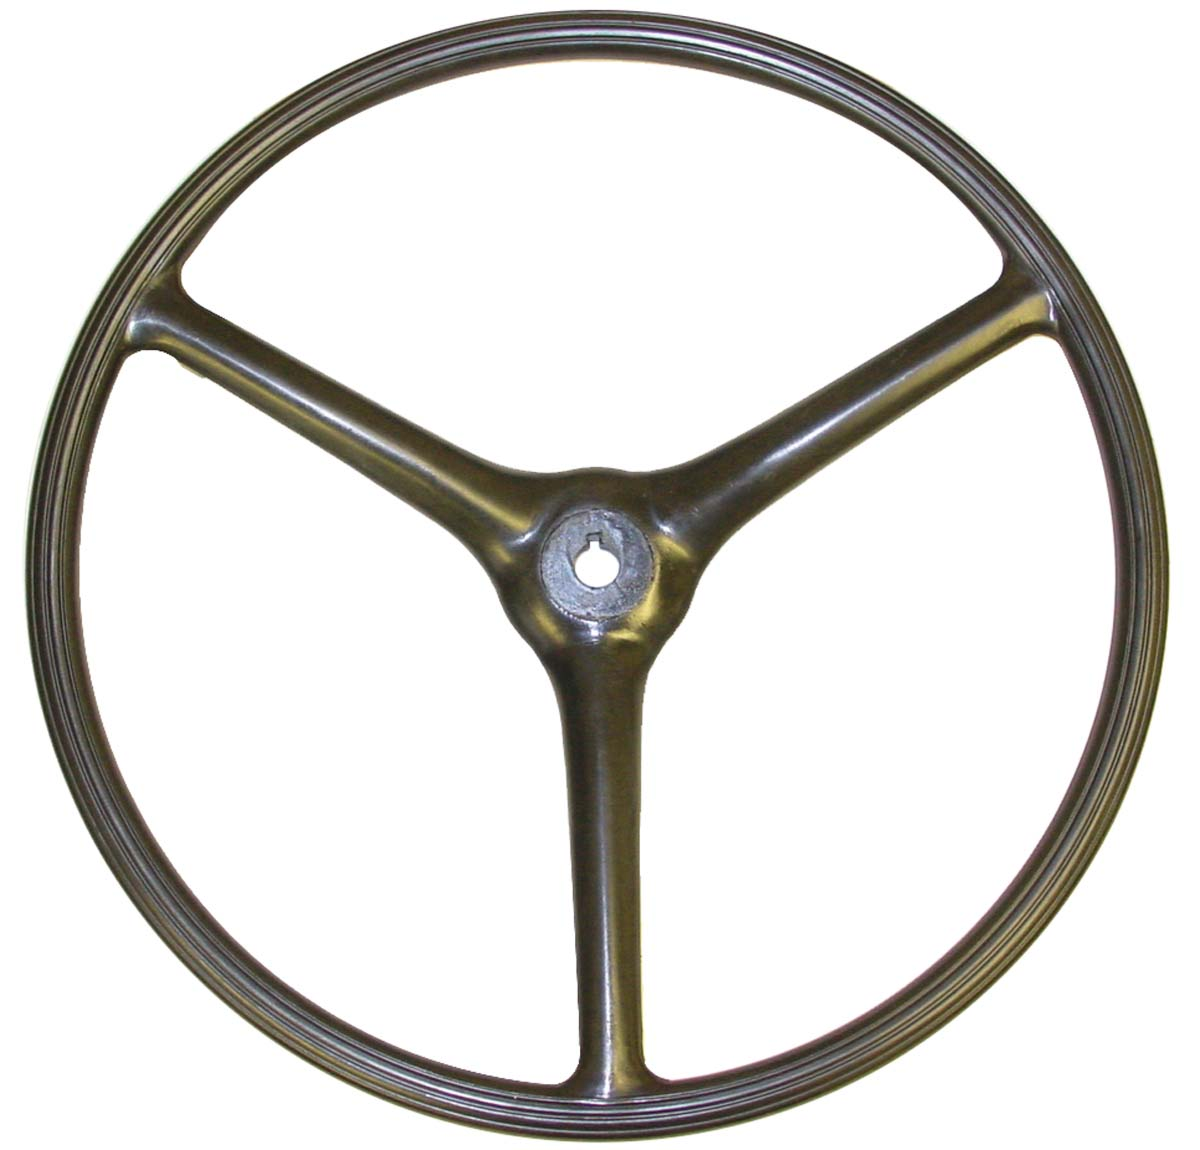 Steering wheel for ford 8n tractor #1